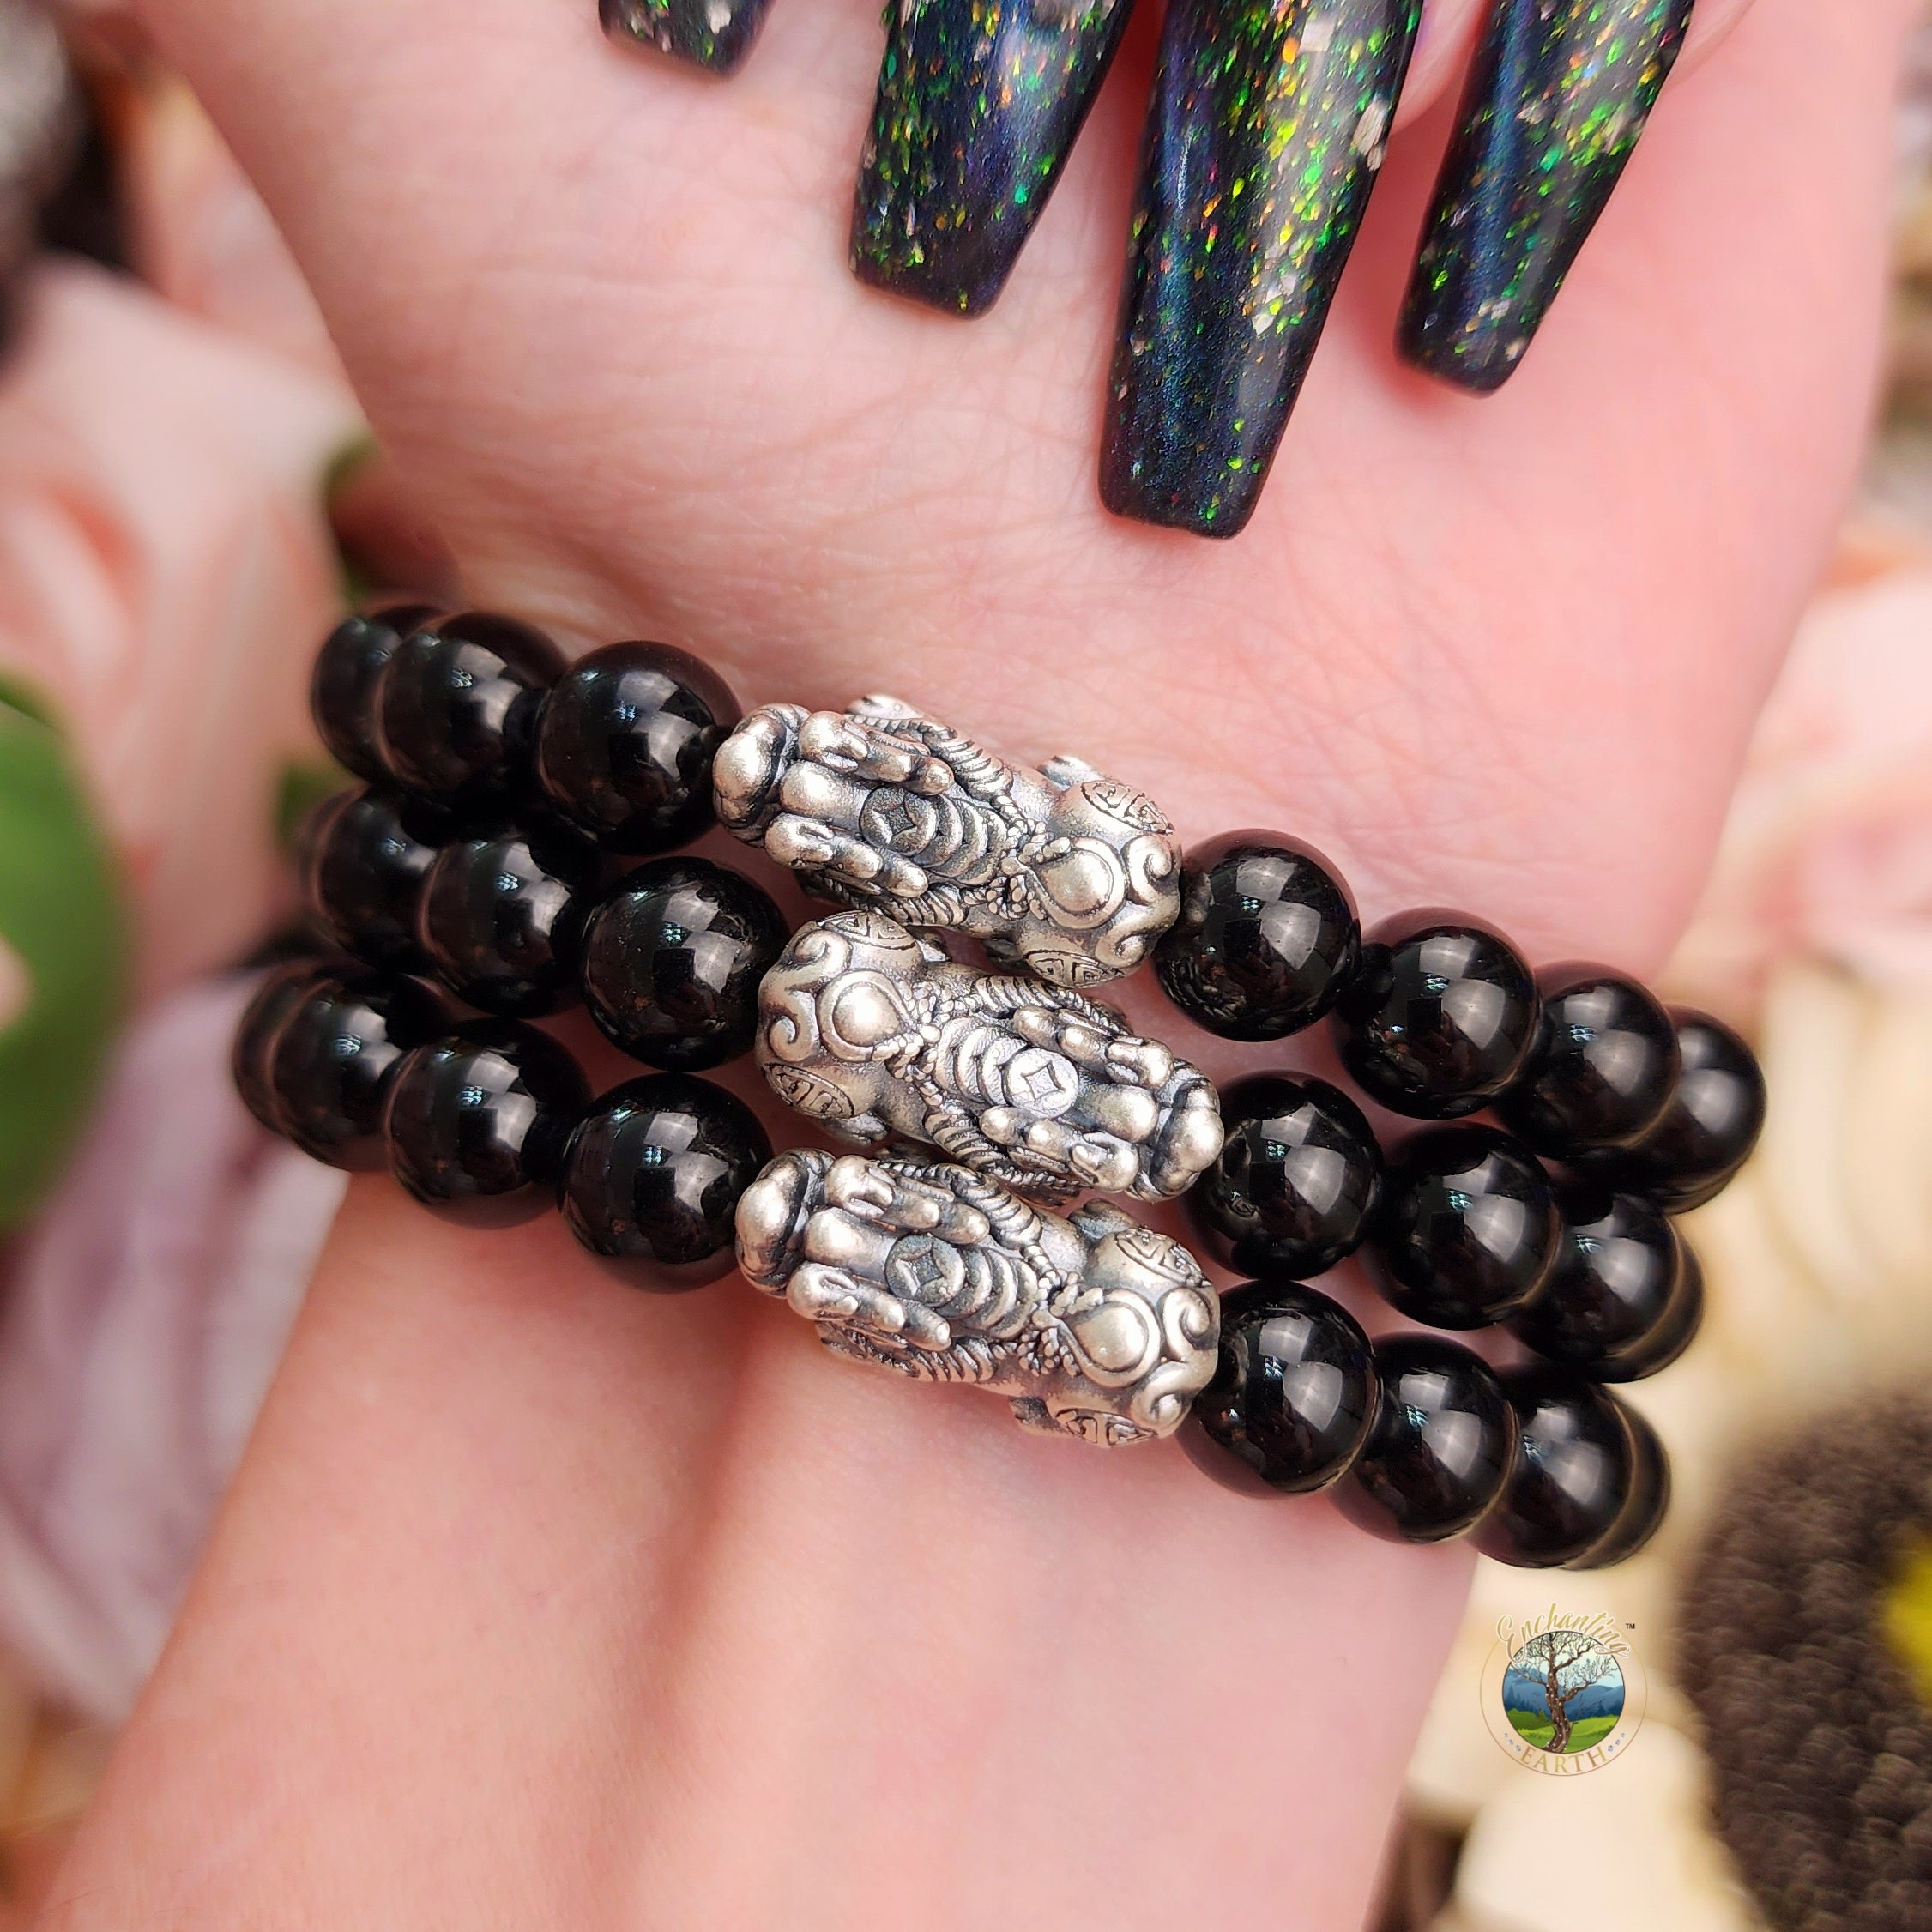 Black Tourmaline Silver Pixiu Bracelet for Good Luck, Protection and Wealth